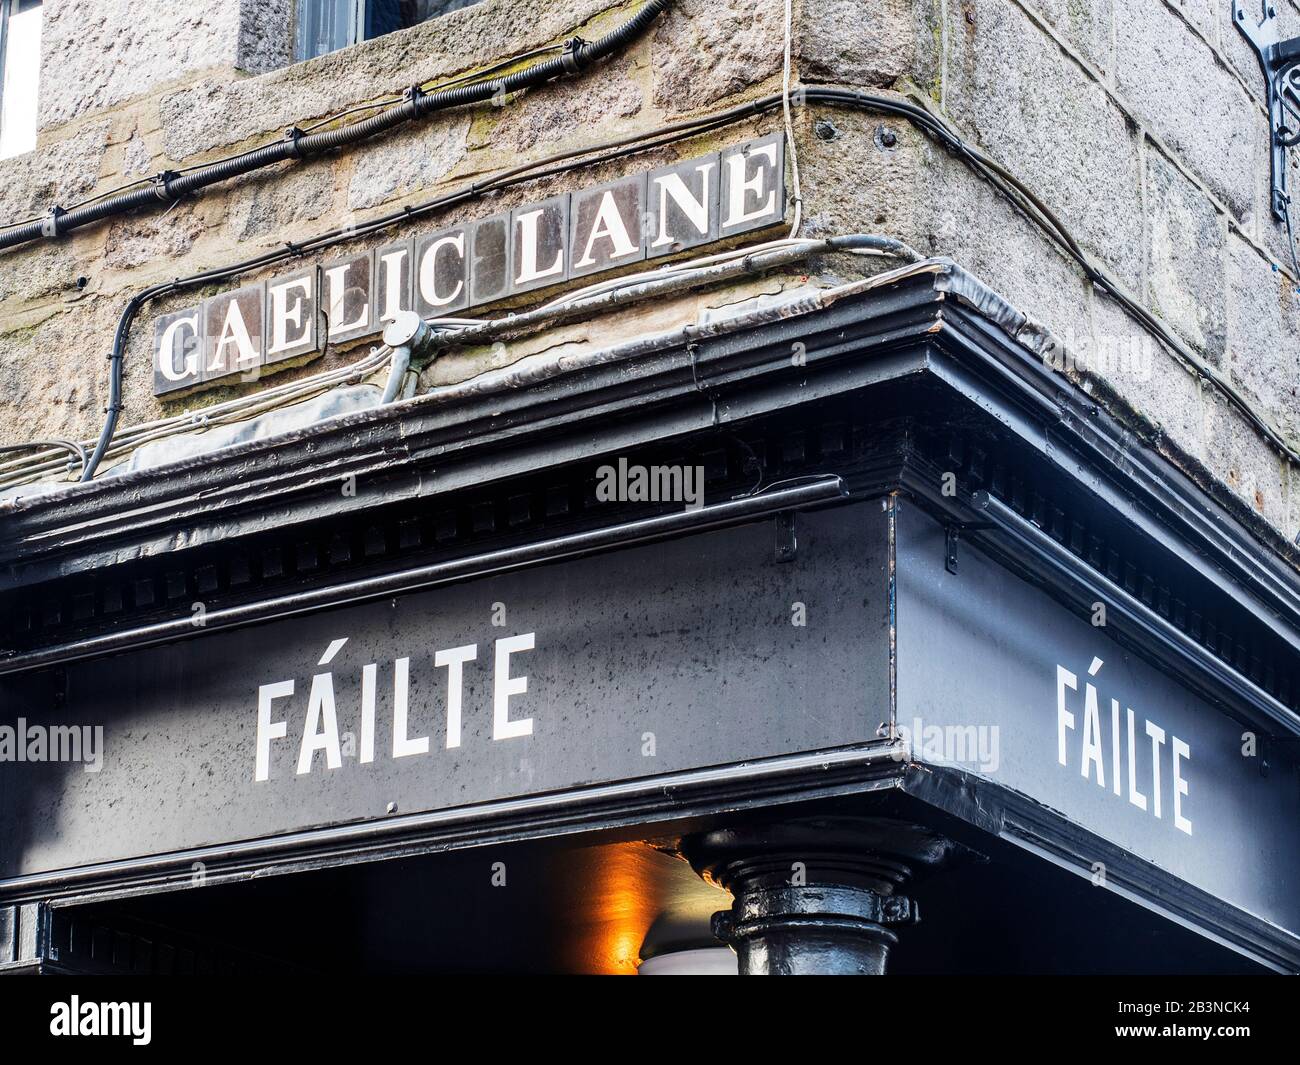 Gaelic Lane street name above a pub entrance with Failte welcome in Irish in Aberdeen Scotland Stock Photo